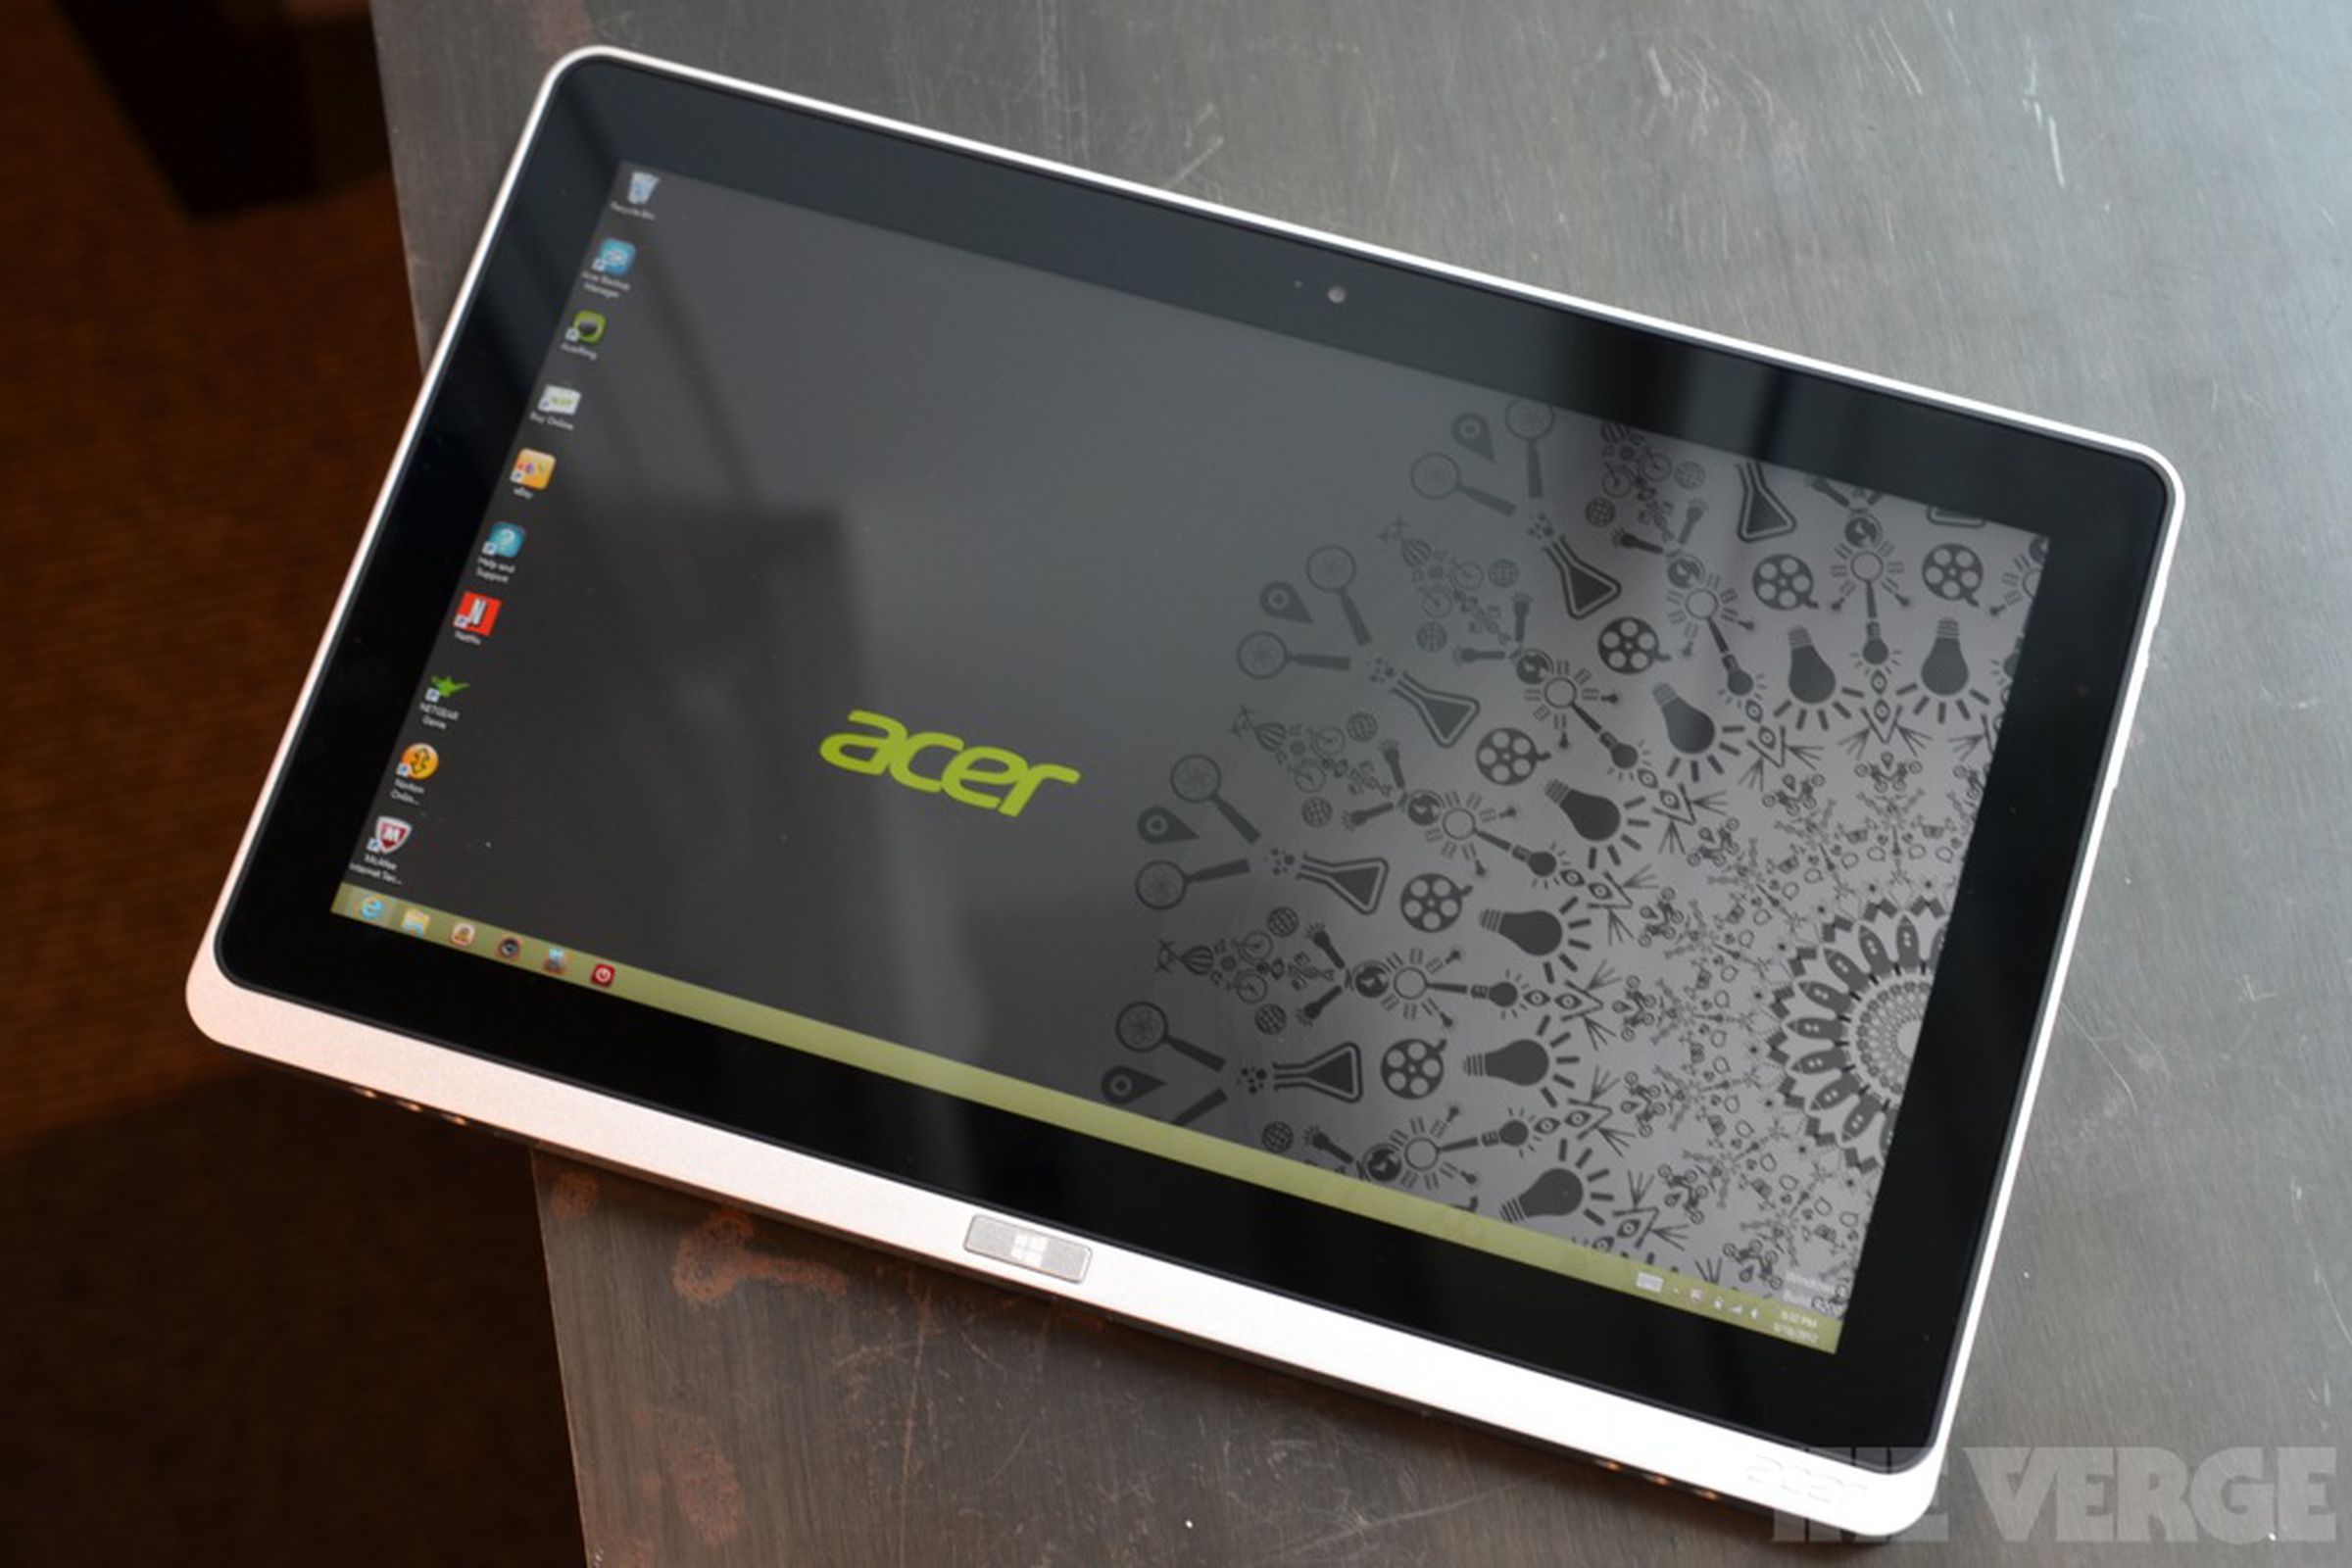 Gallery Photo: Acer Iconia W700 hands-on photos